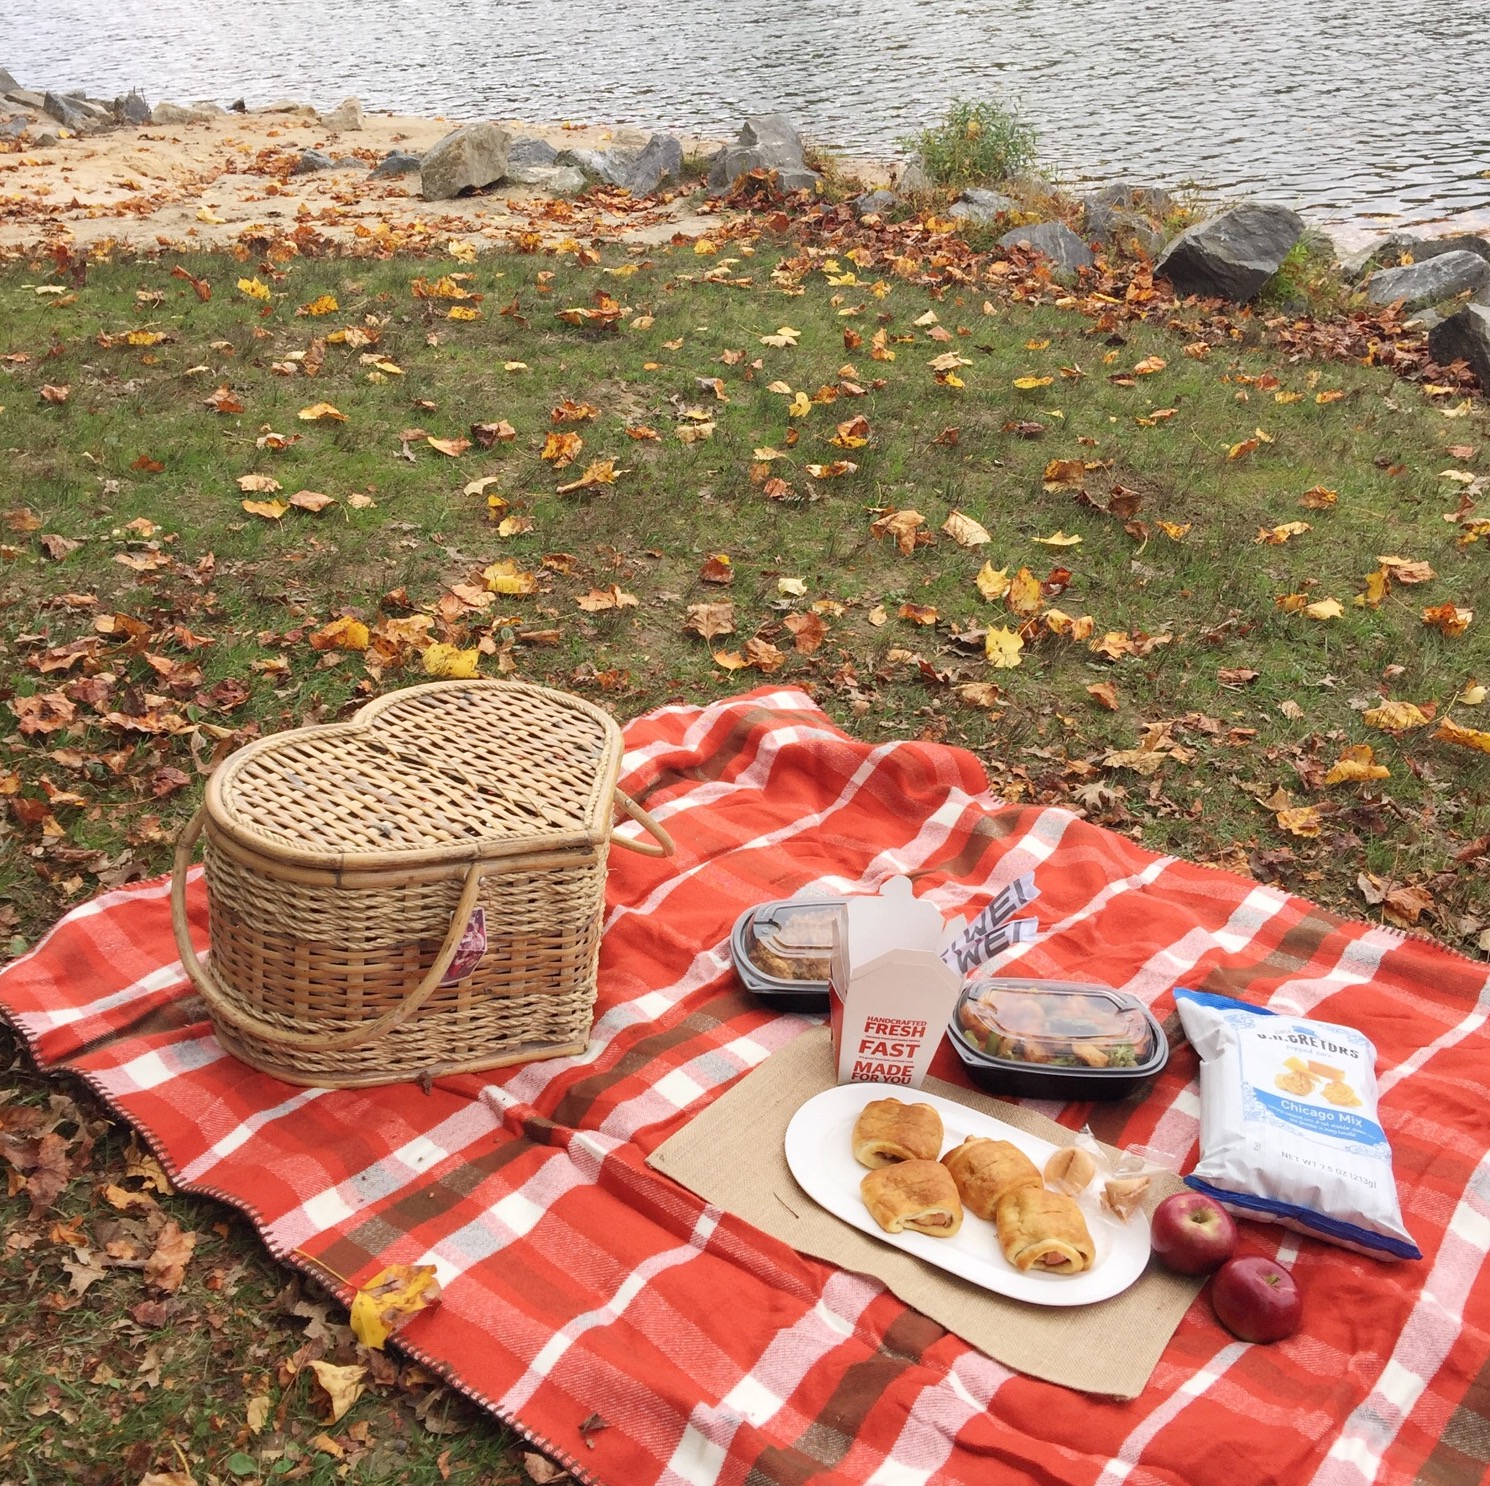 cute things to do on a picnic